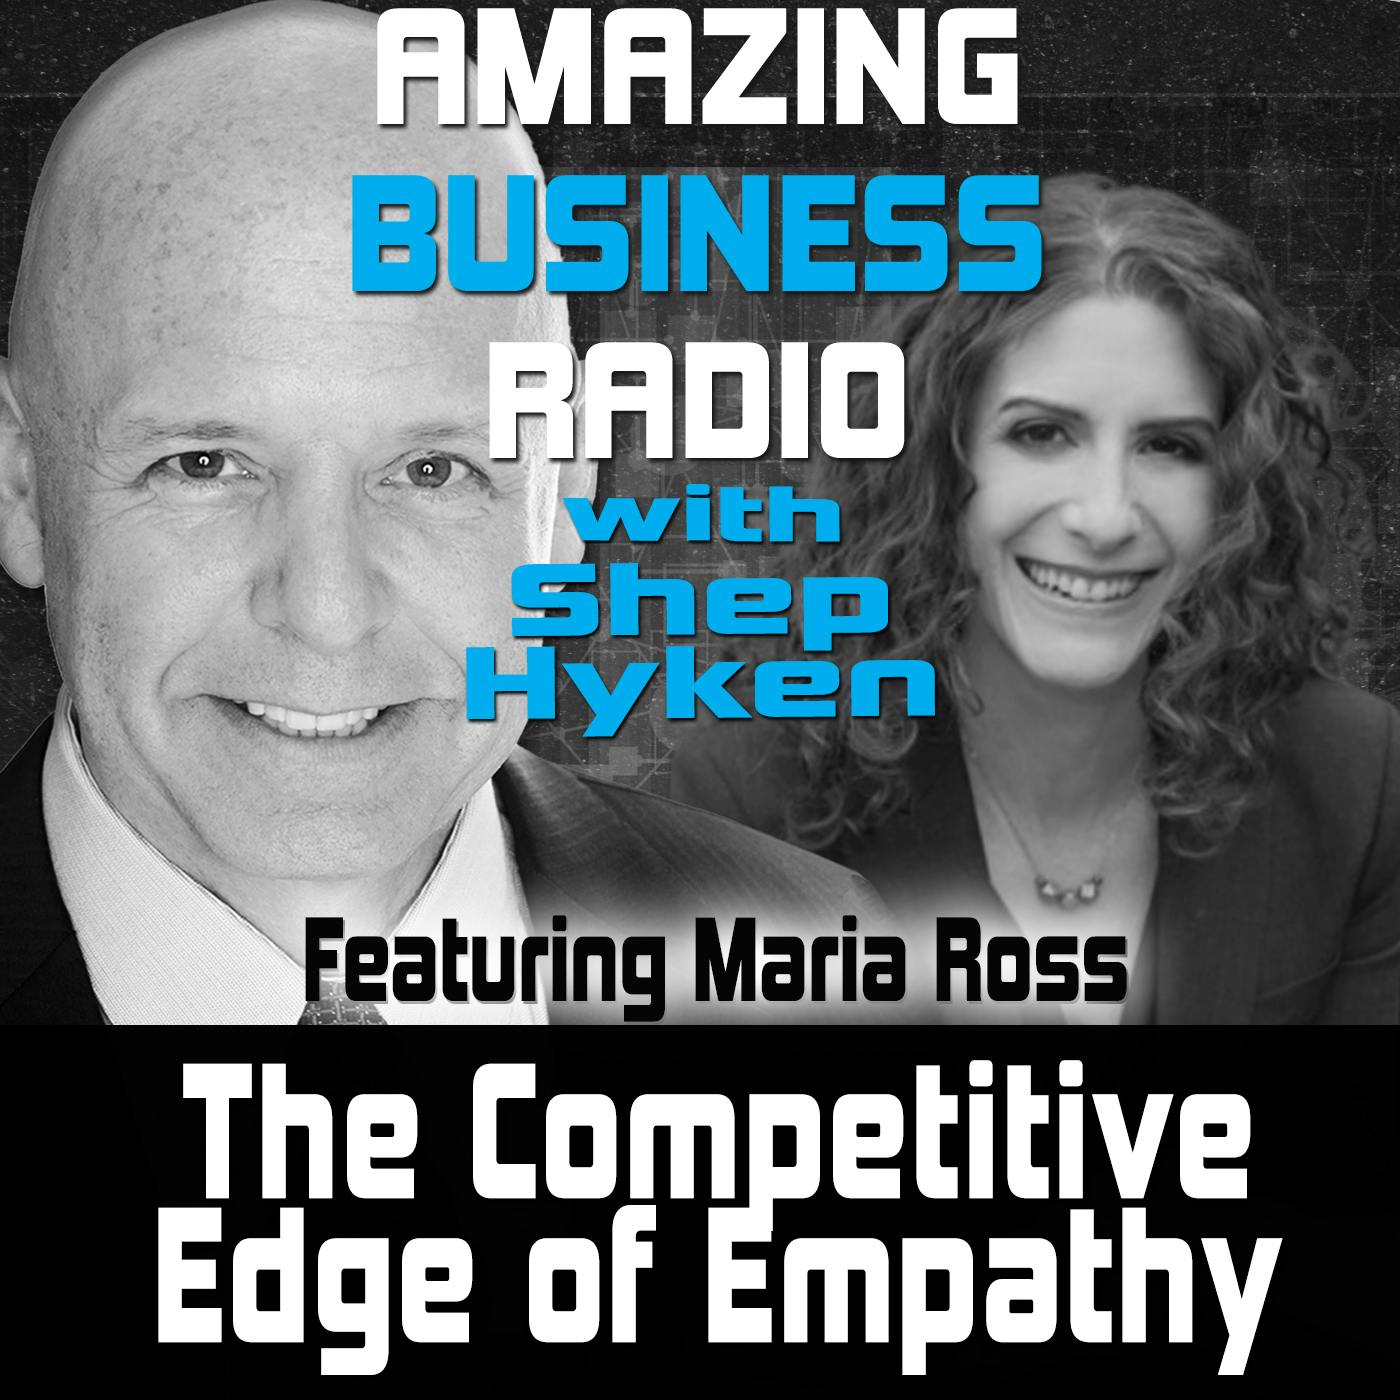 The Competitive Edge of Empathy Featuring Maria Ross